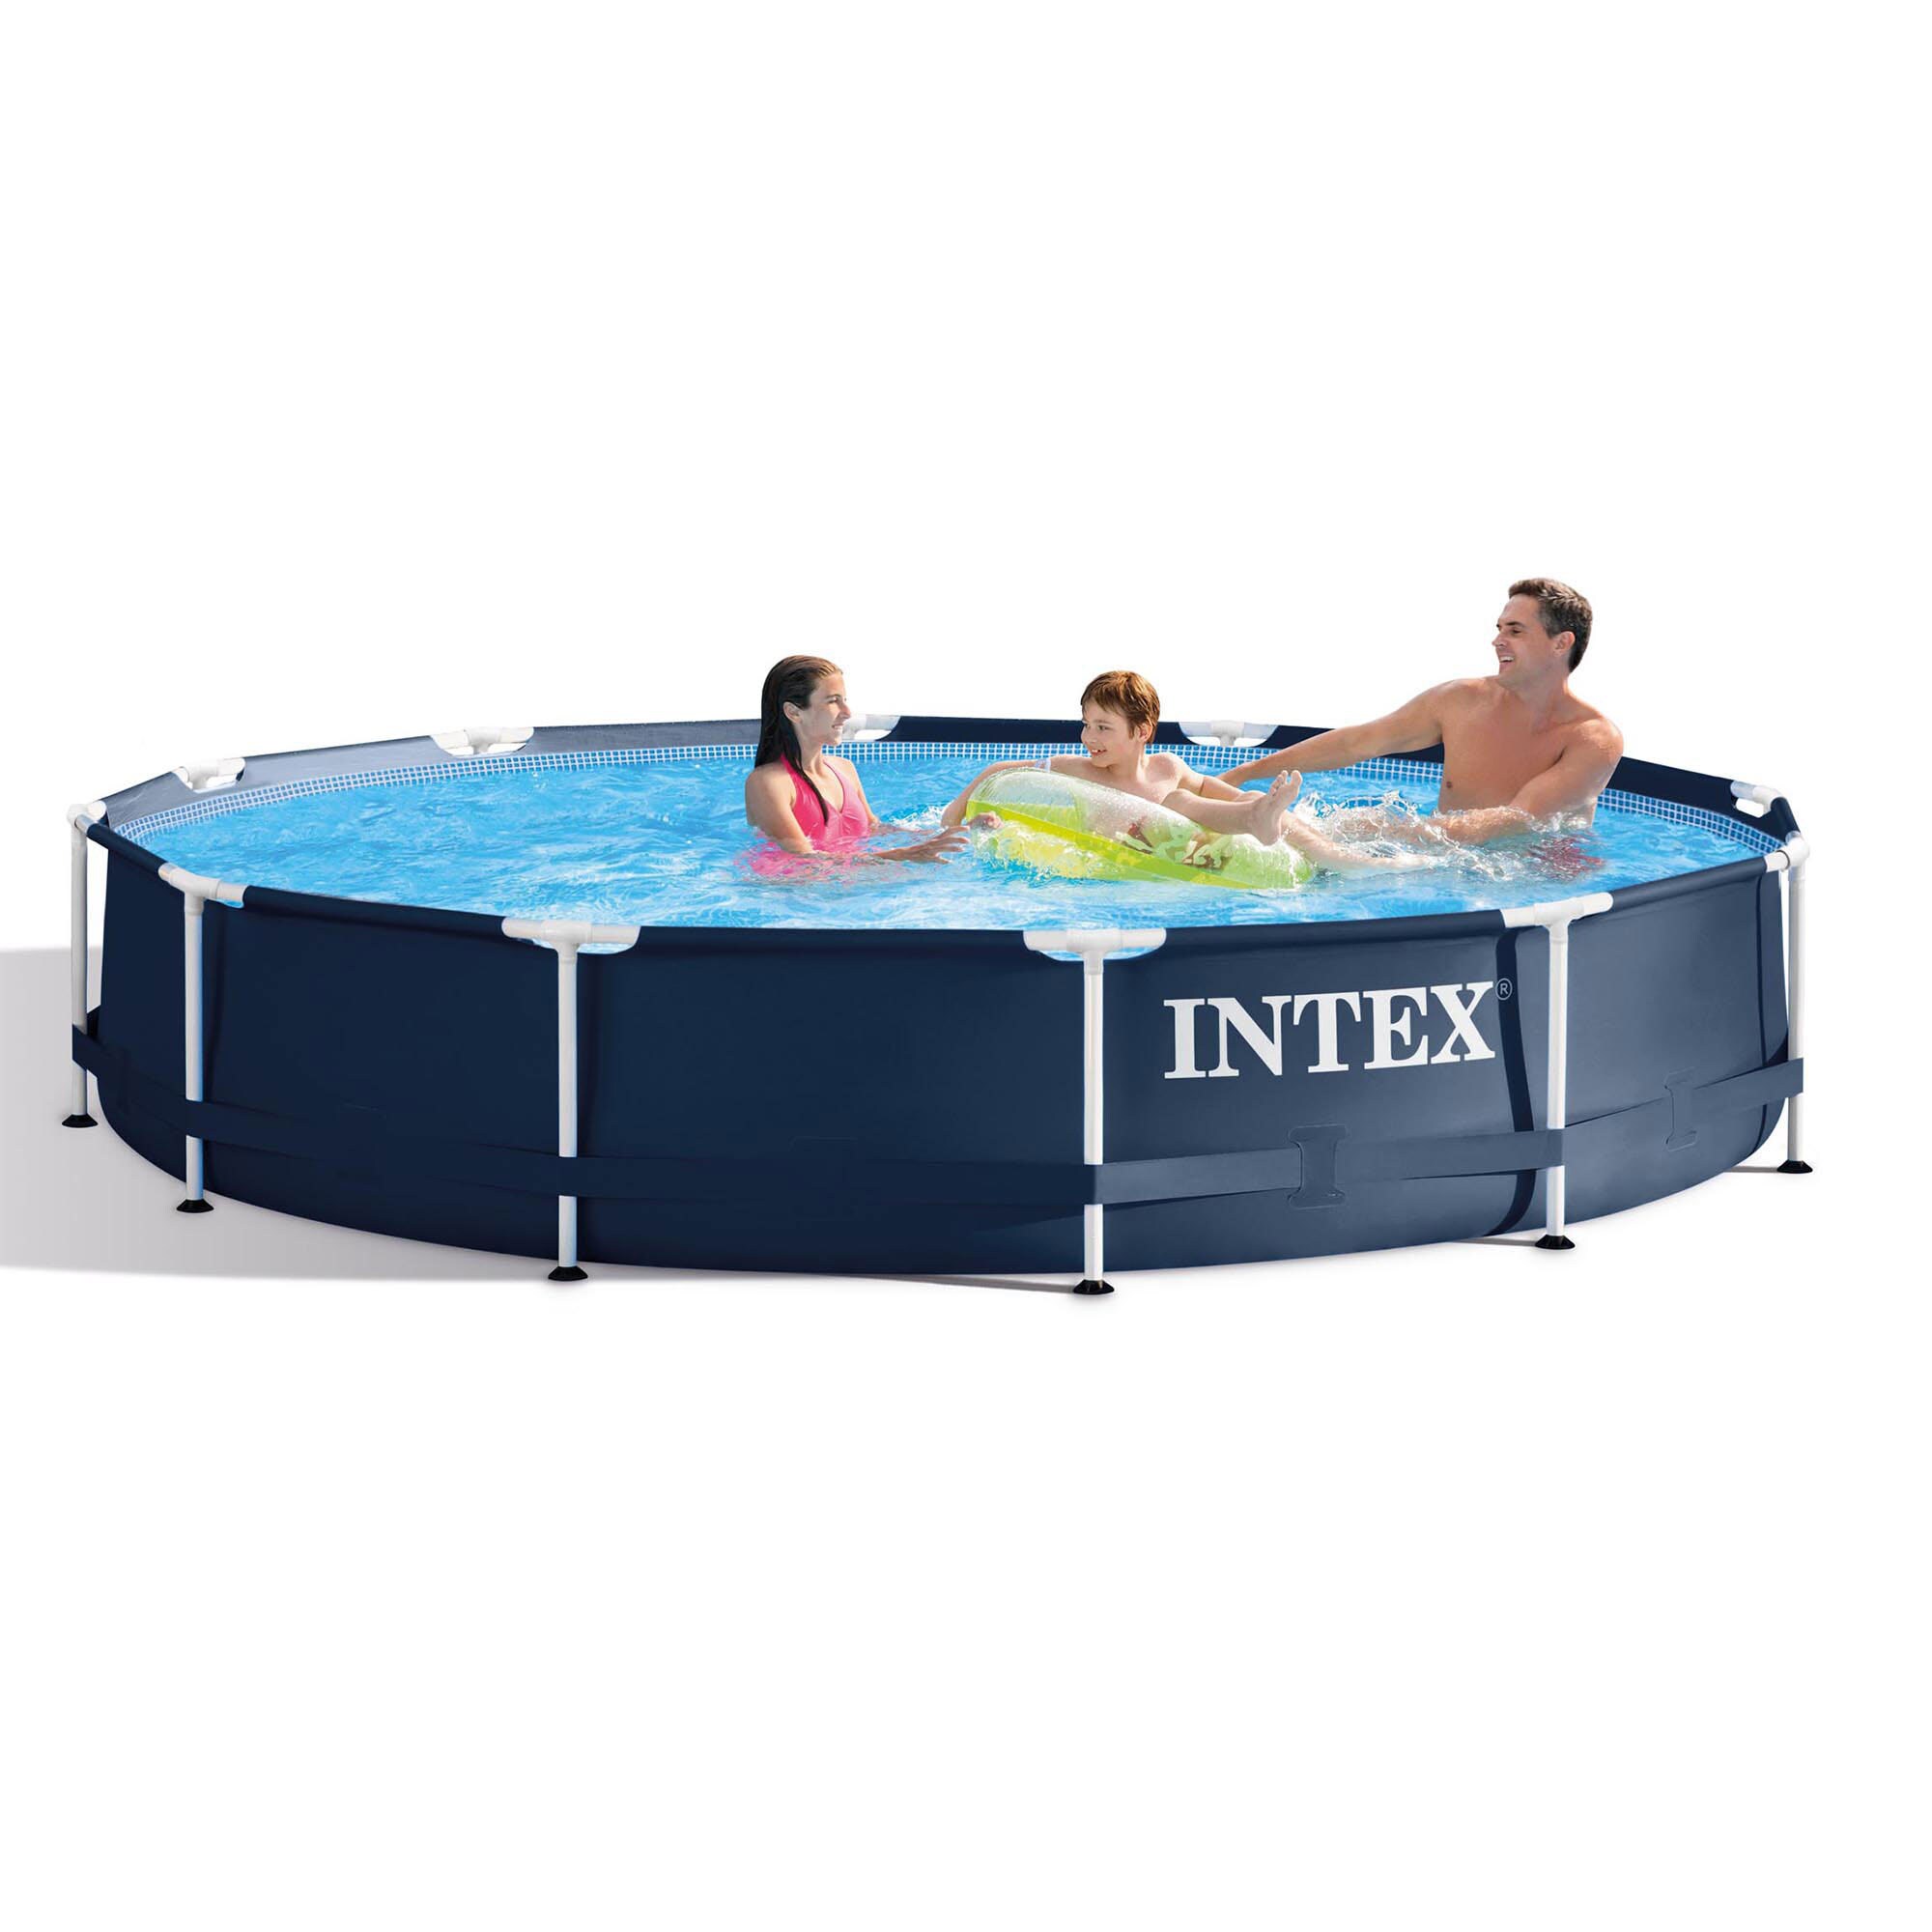 Intex 12 Ft X 12 Ft X 30 In Metal Frame Round Above Ground Pool With Filter Pump In The Above